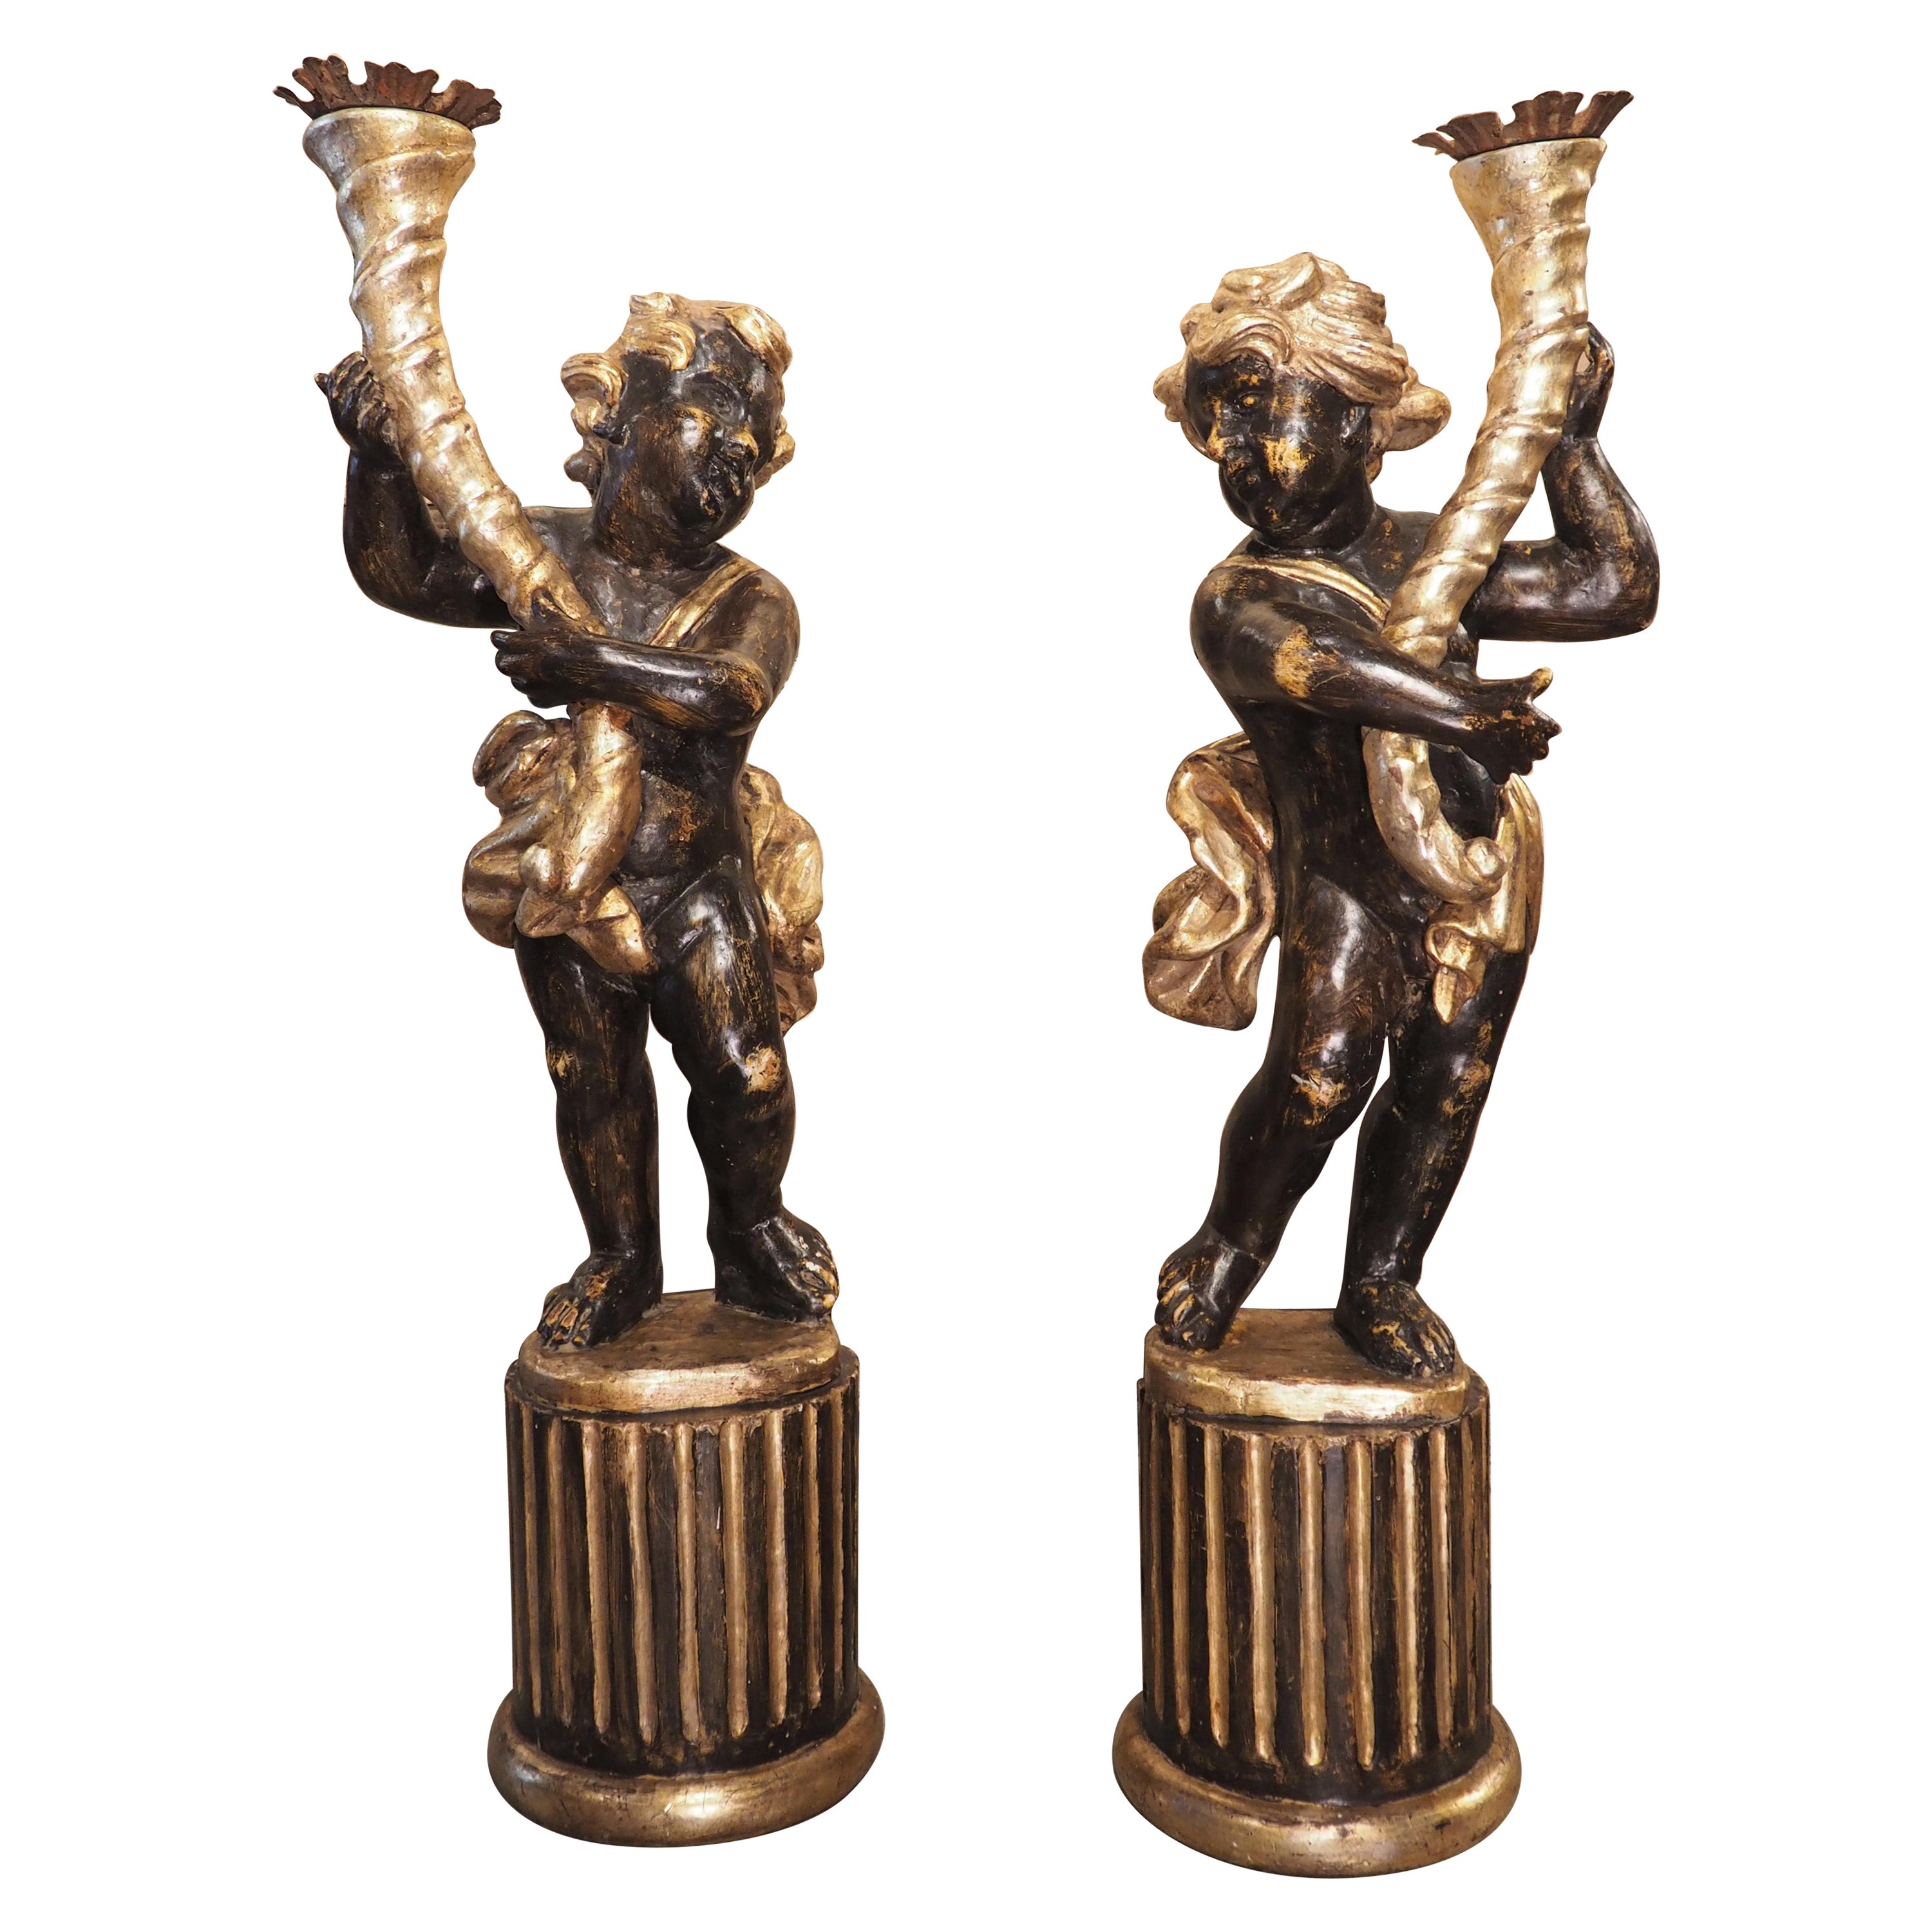 Pair of Italian 18th Century Painted and Gilt Putti with Cornucopia Torcheres